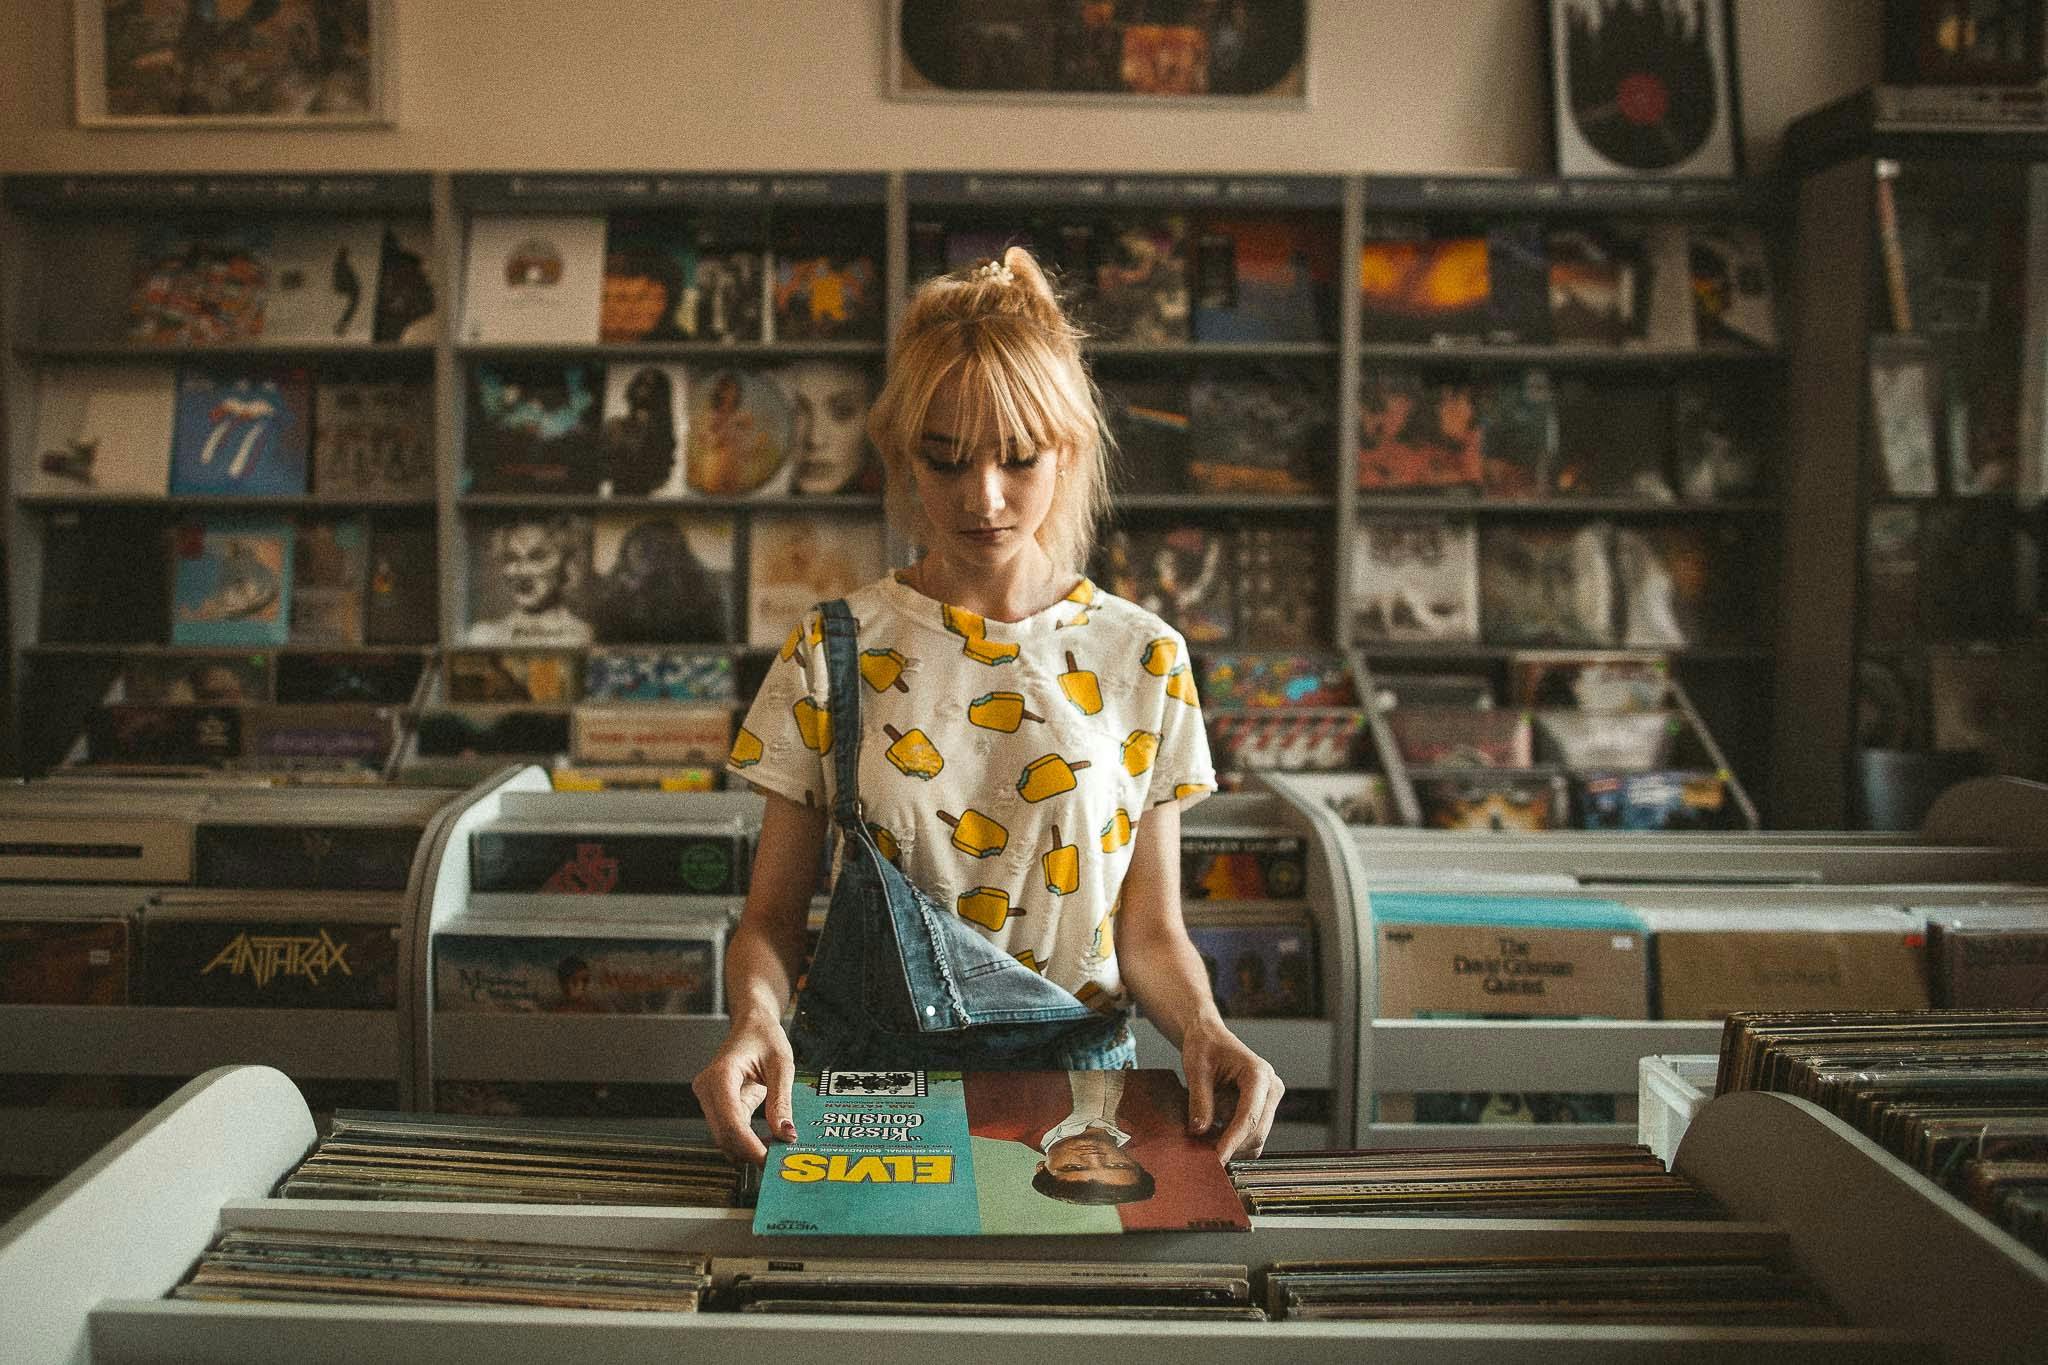 Caucasian woman holding a vinyl in an old, vintage record store.